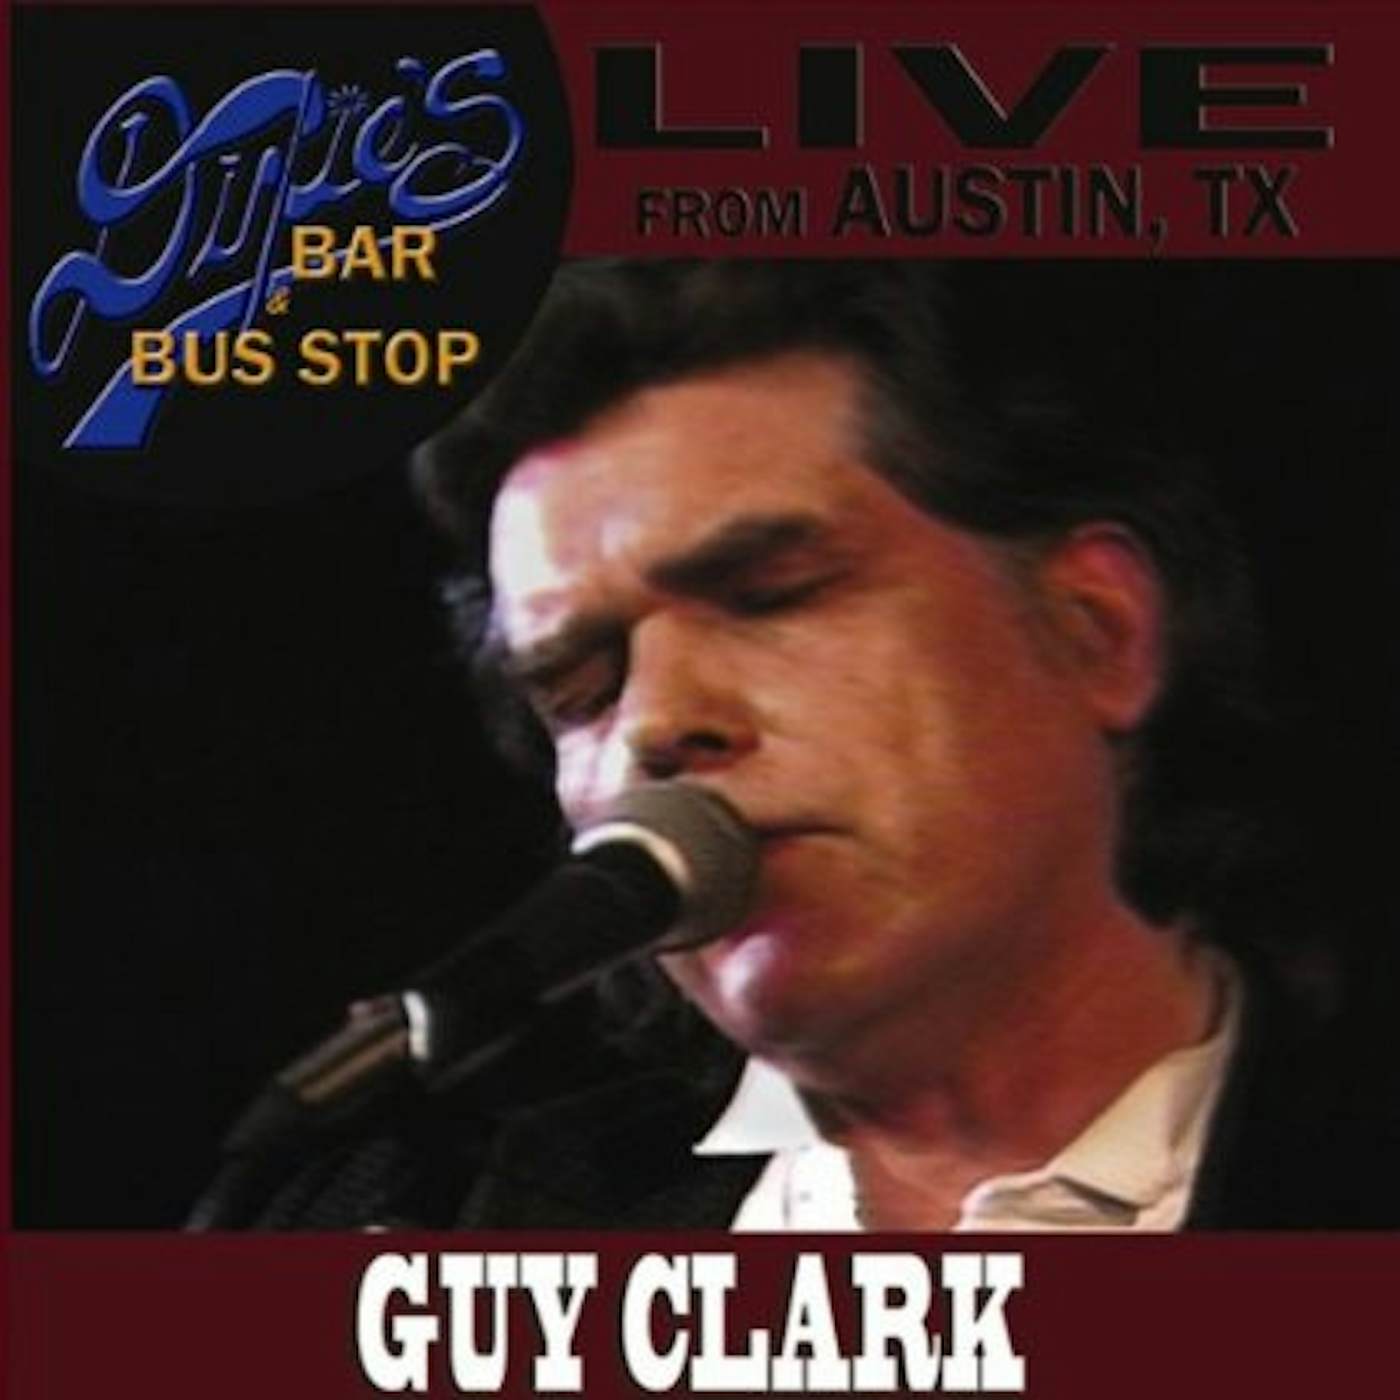 Guy Clark LIVE FROM DIXIE'S BAR & BUS STOP CD